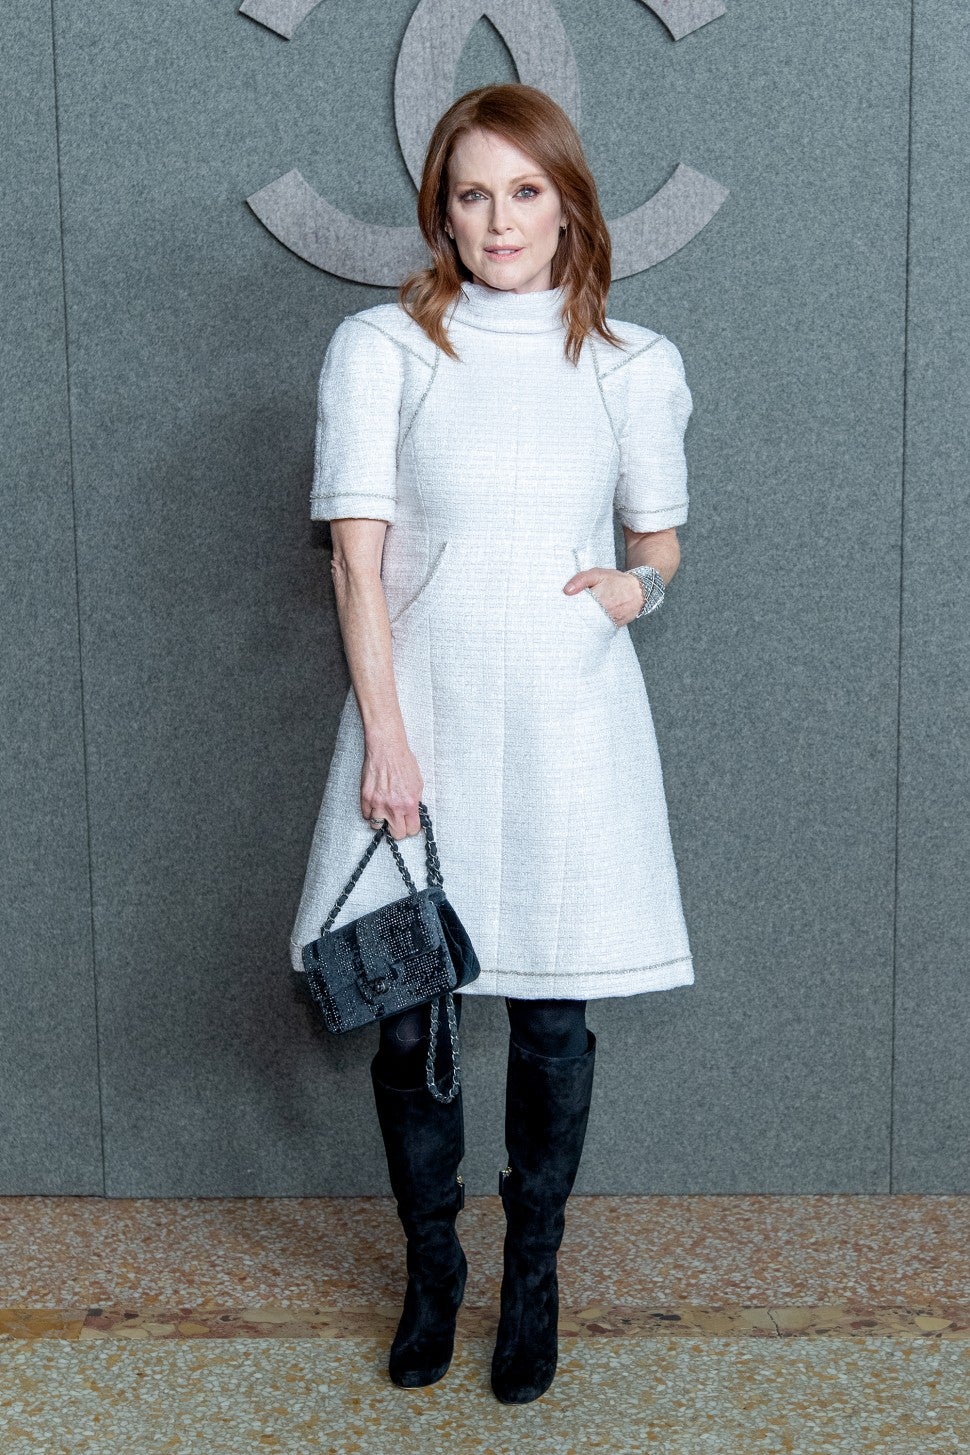 Julianne Moore at Chanel pre-fall show